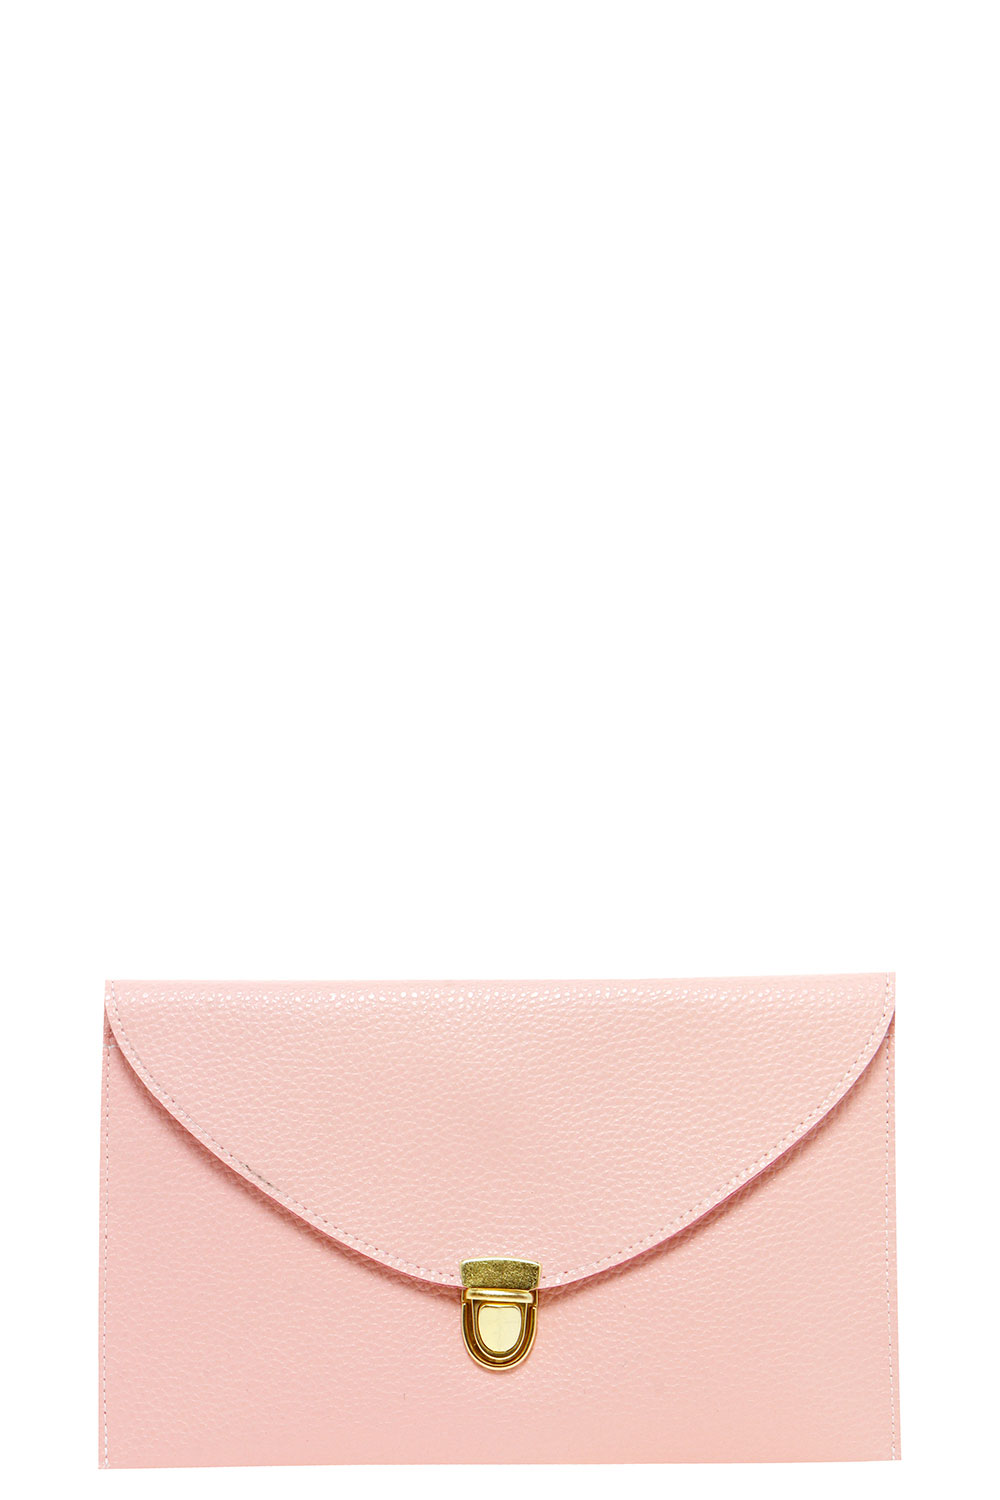 Lily Clasp Fasten Clutch Bag - pink